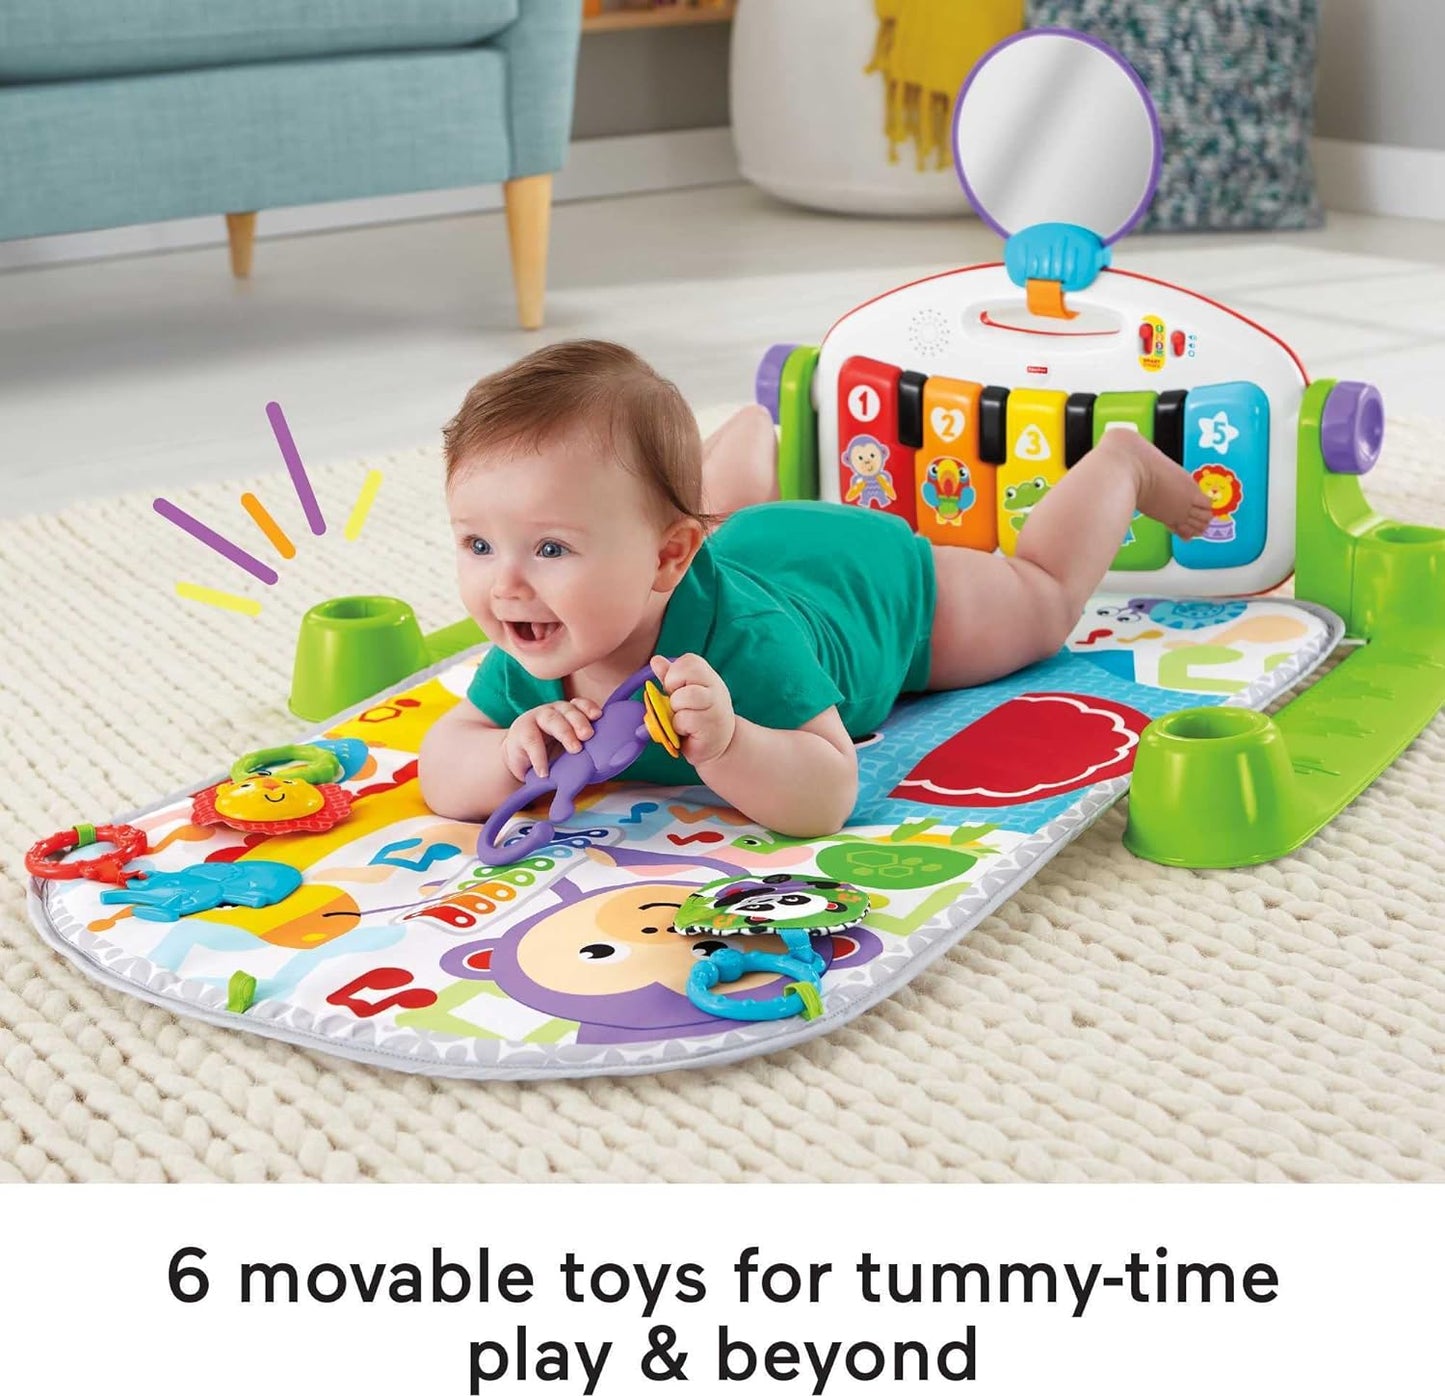 Fisher-Price Baby Bouncer Animal Wonders Jumperoo Activity Center With Music Lights Sounds And Developmental Toys